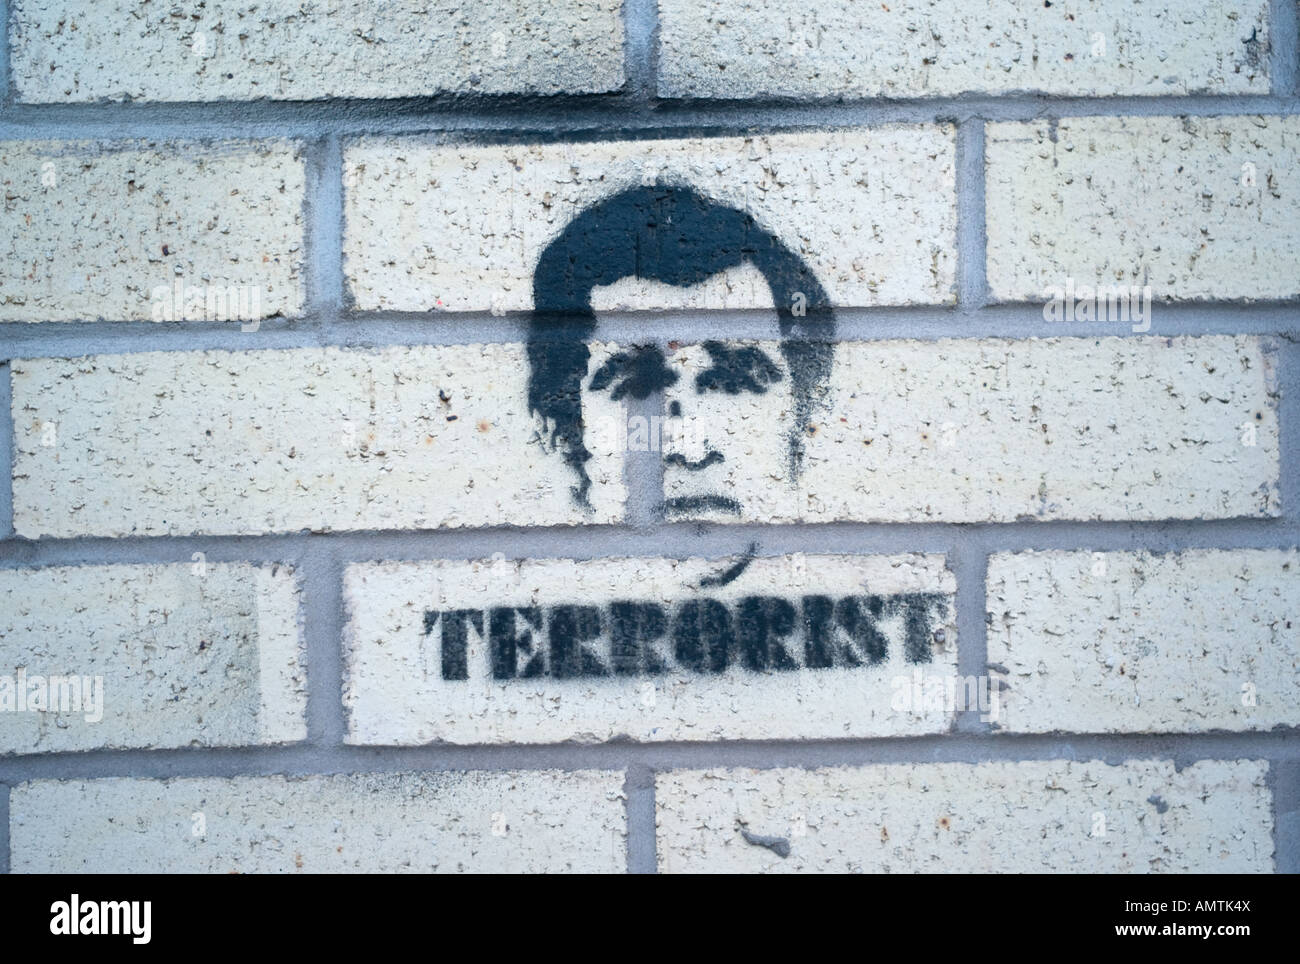 Stencilled graffiti showing the face of President George W Bush as a terrorist on a brick wall Stock Photo